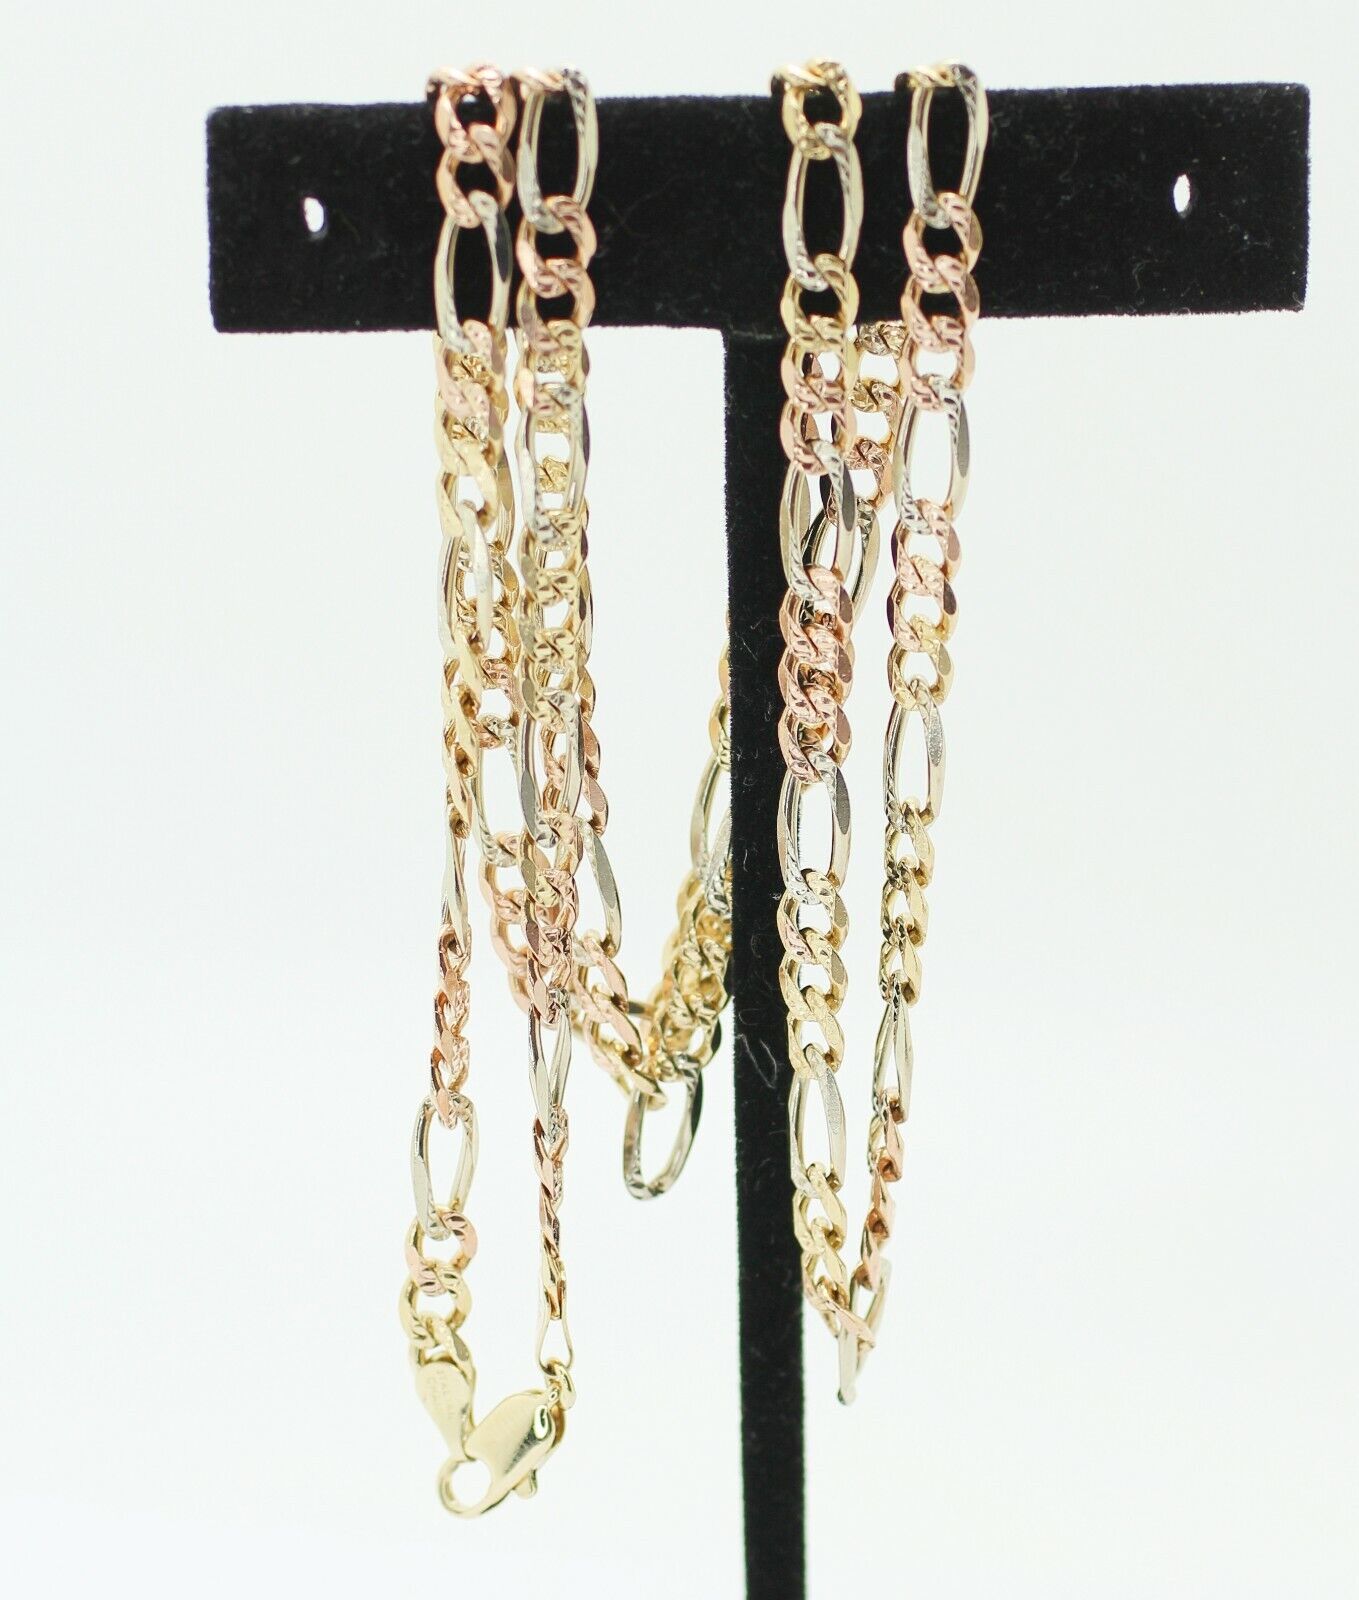 Unisex 14k Two-Tone Gold Figaro Chain Necklace in 24inch 19.7grs